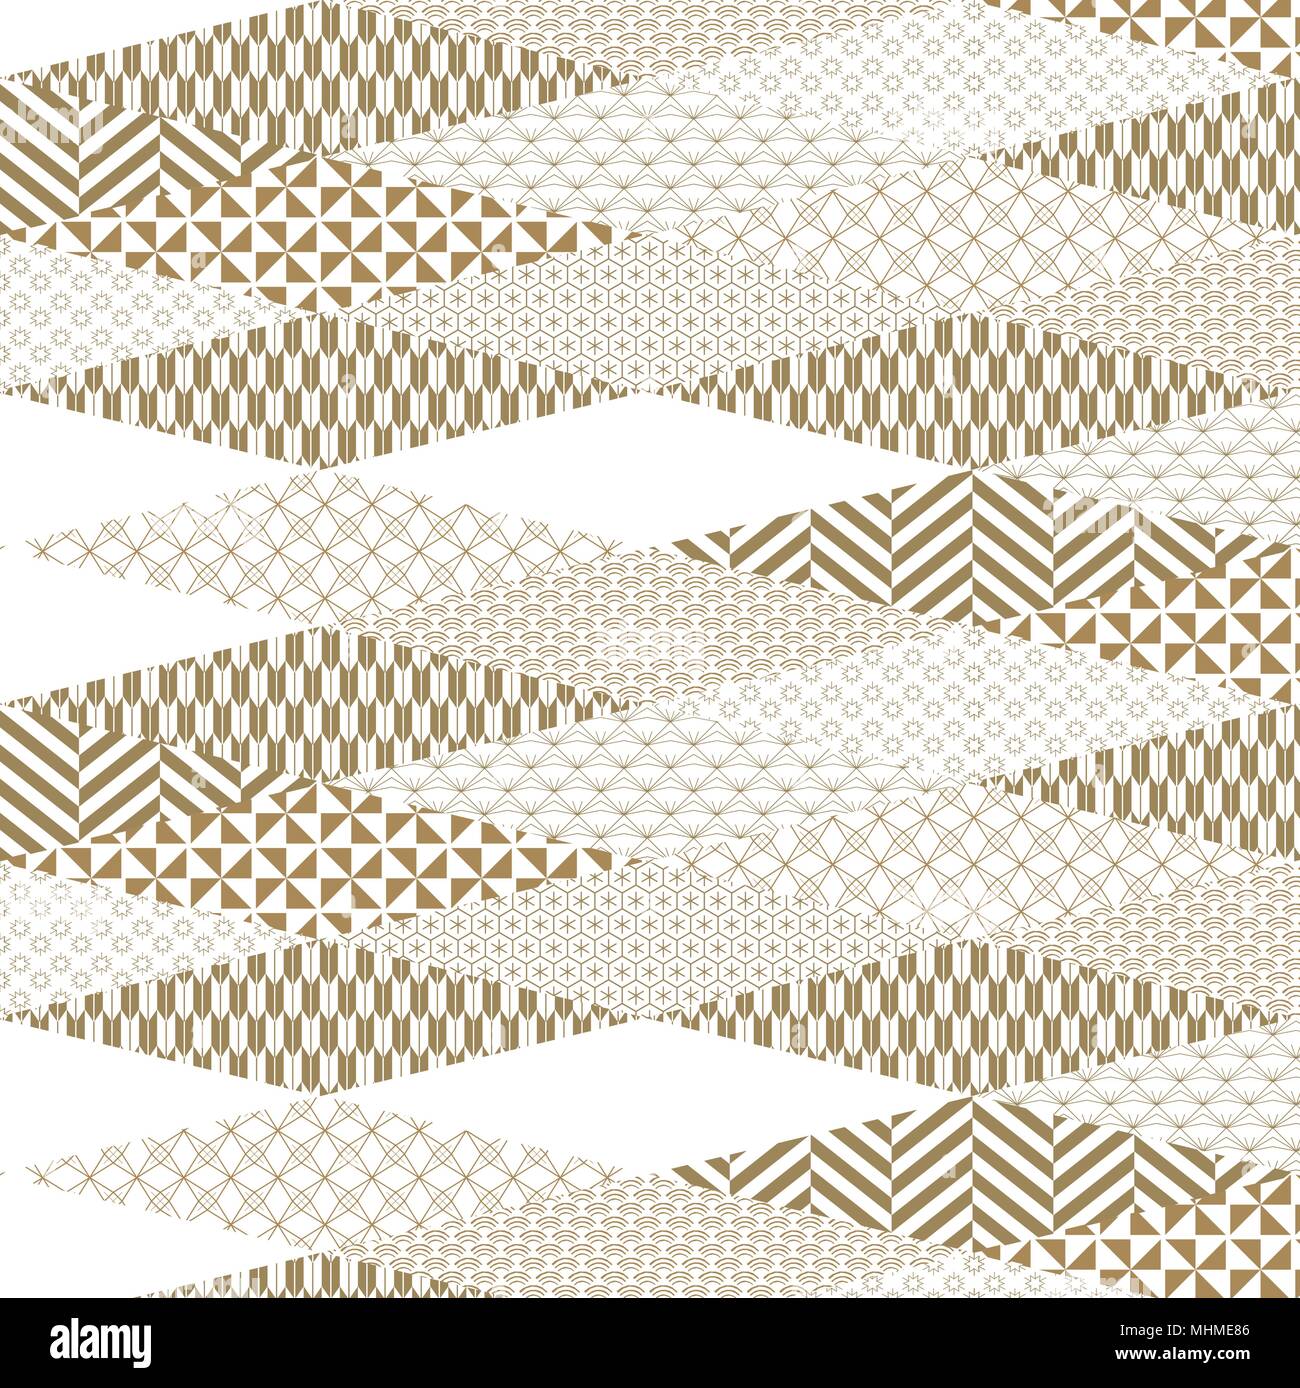 Japanese pattern vector. Gold geometric background in origami paper folding style for cover page design, template, backdrop, poster. Stock Vector